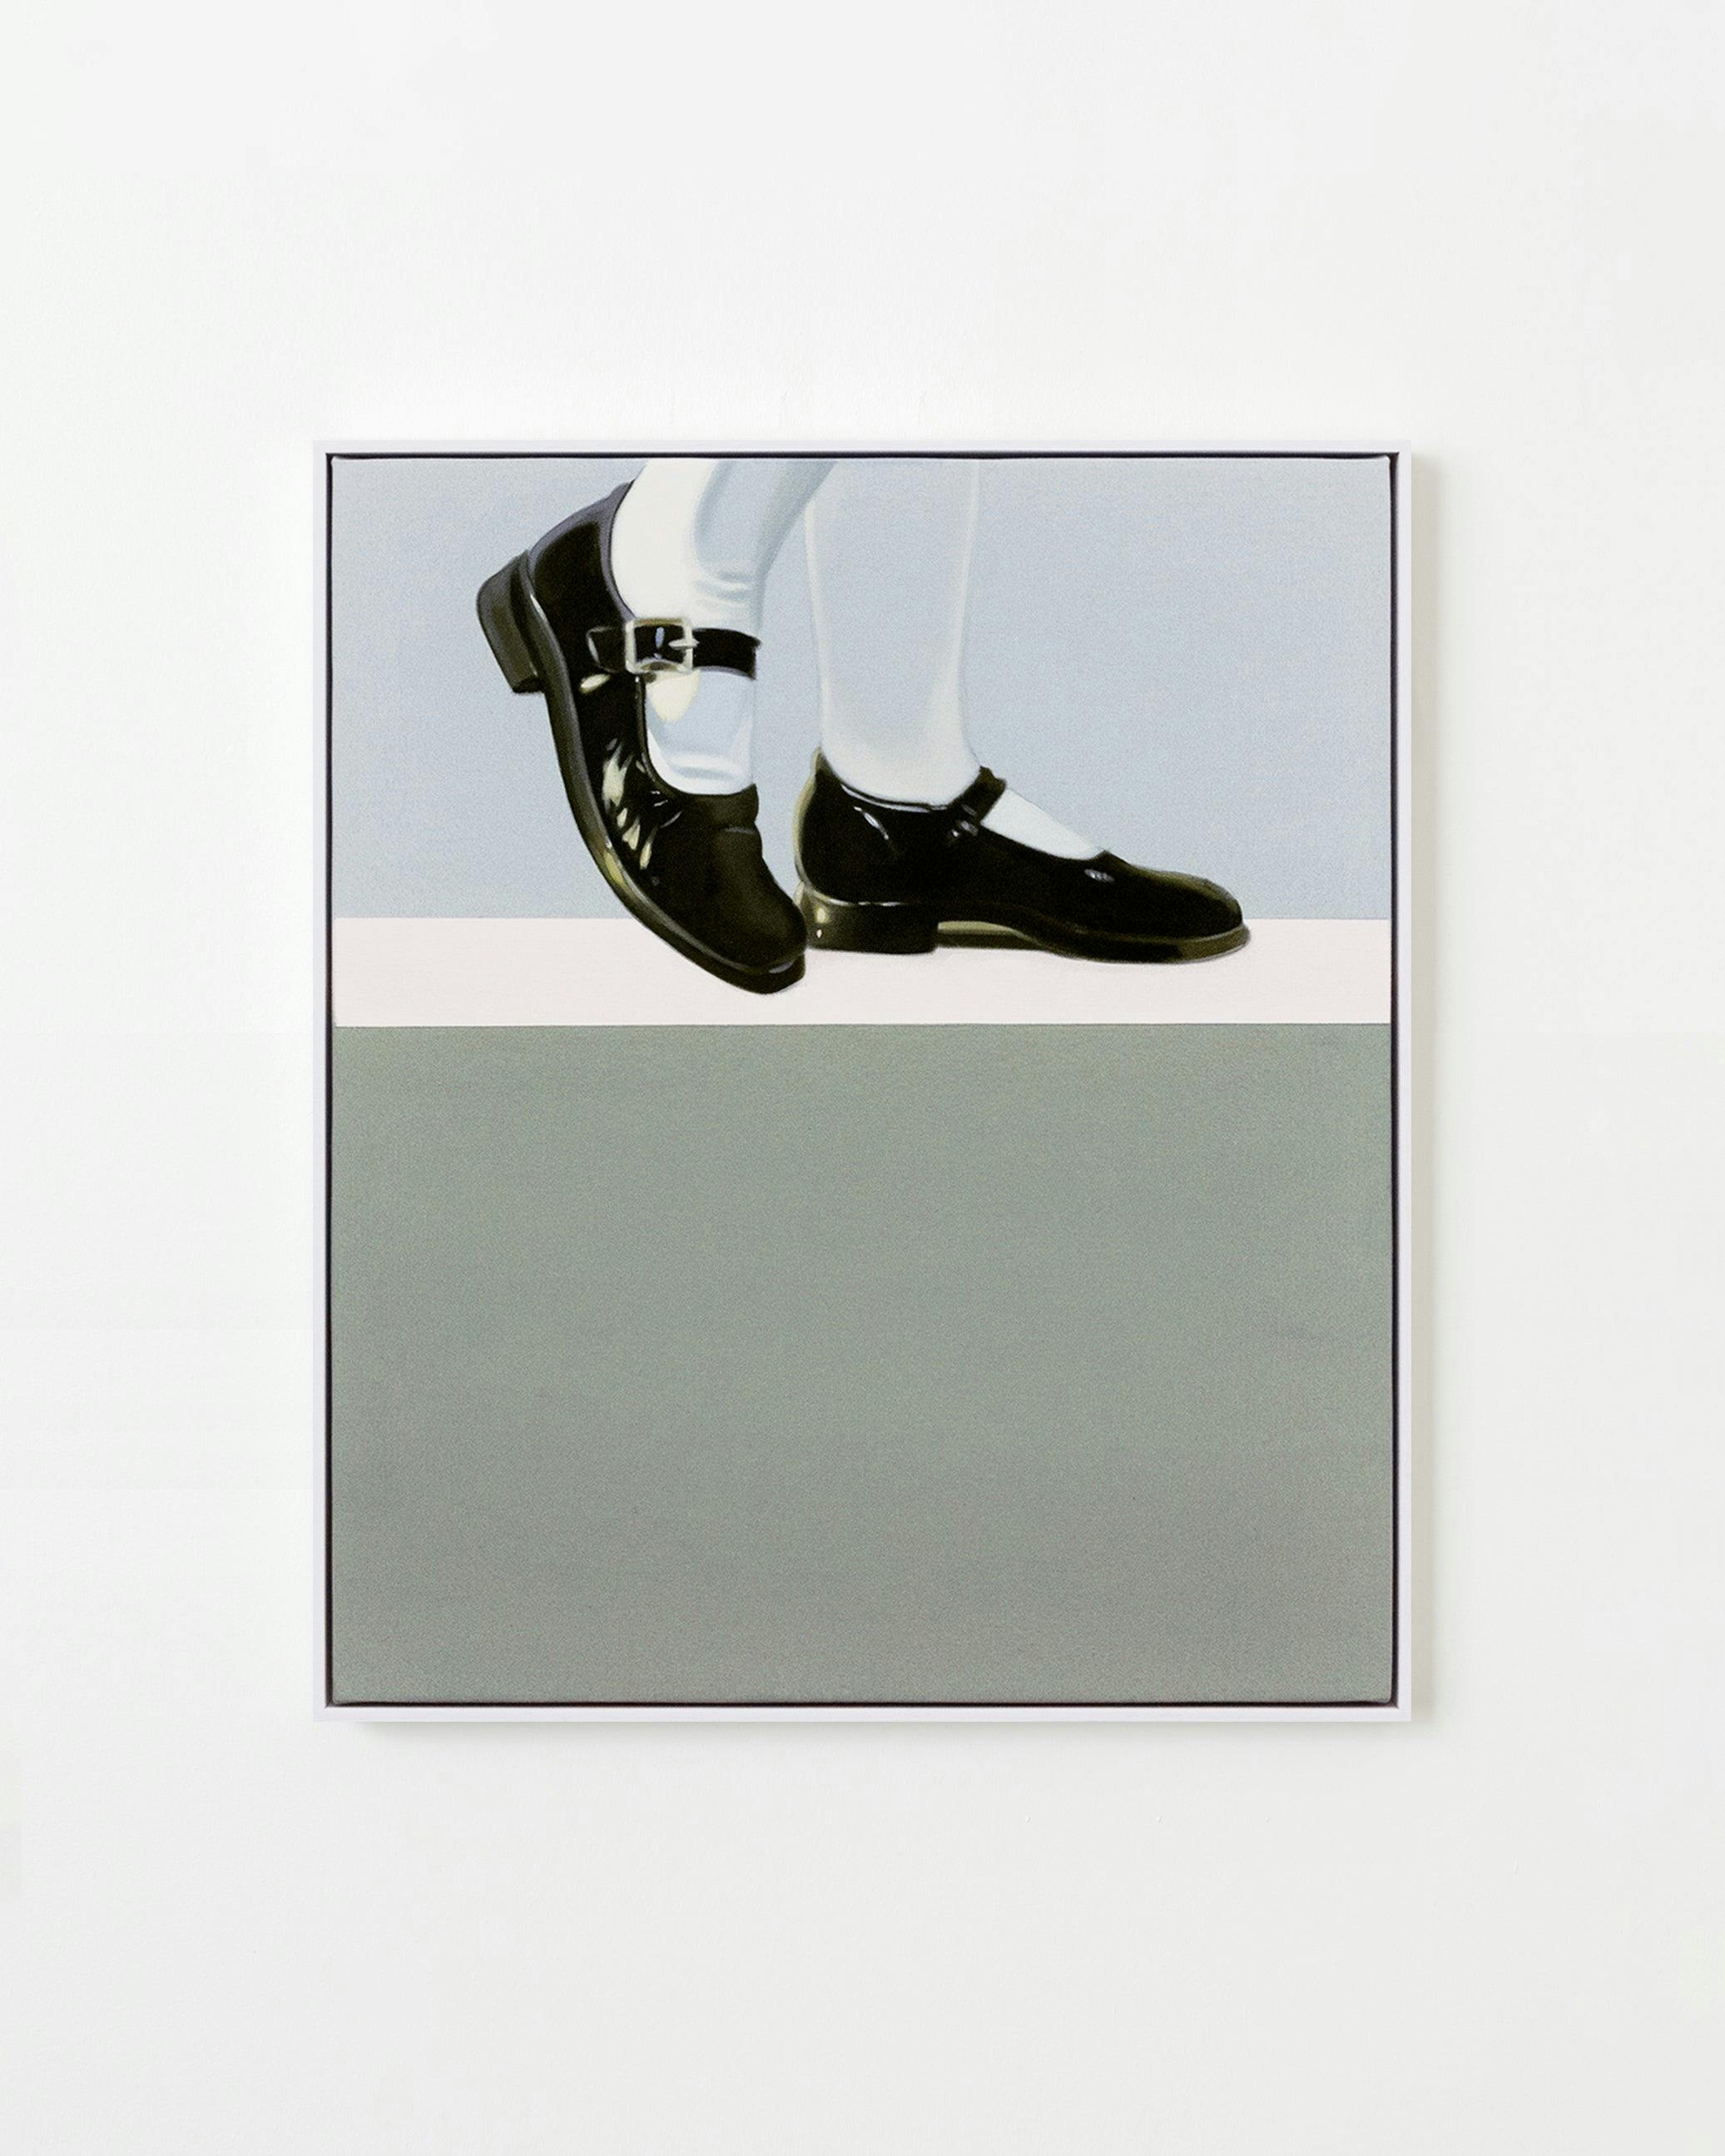 Painting by Bryce Anderson titled "C's Shoes Right".